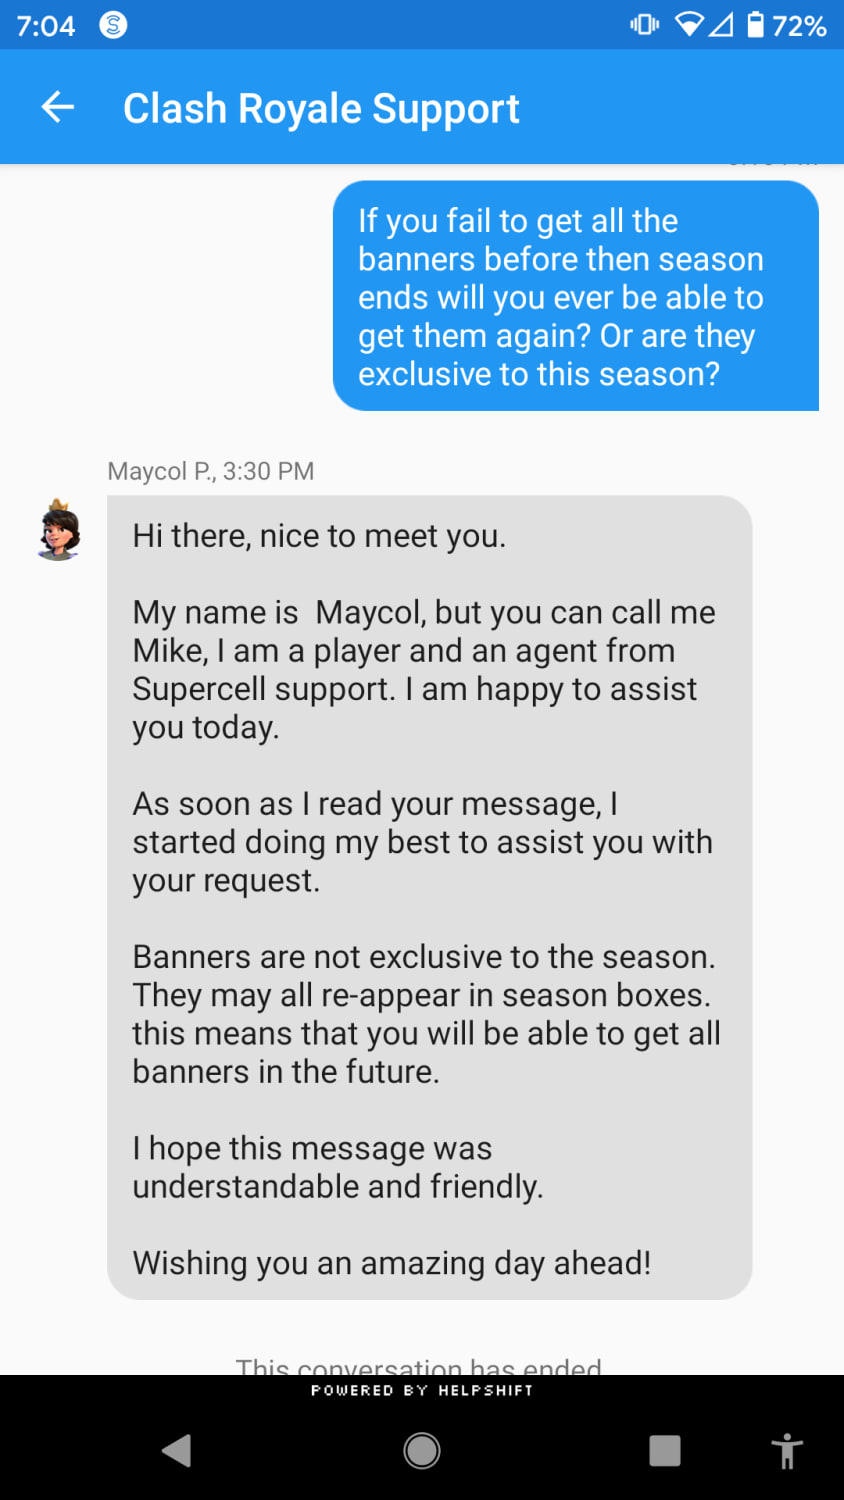 I asked Supercell support about how limited banners are. This was my answer.